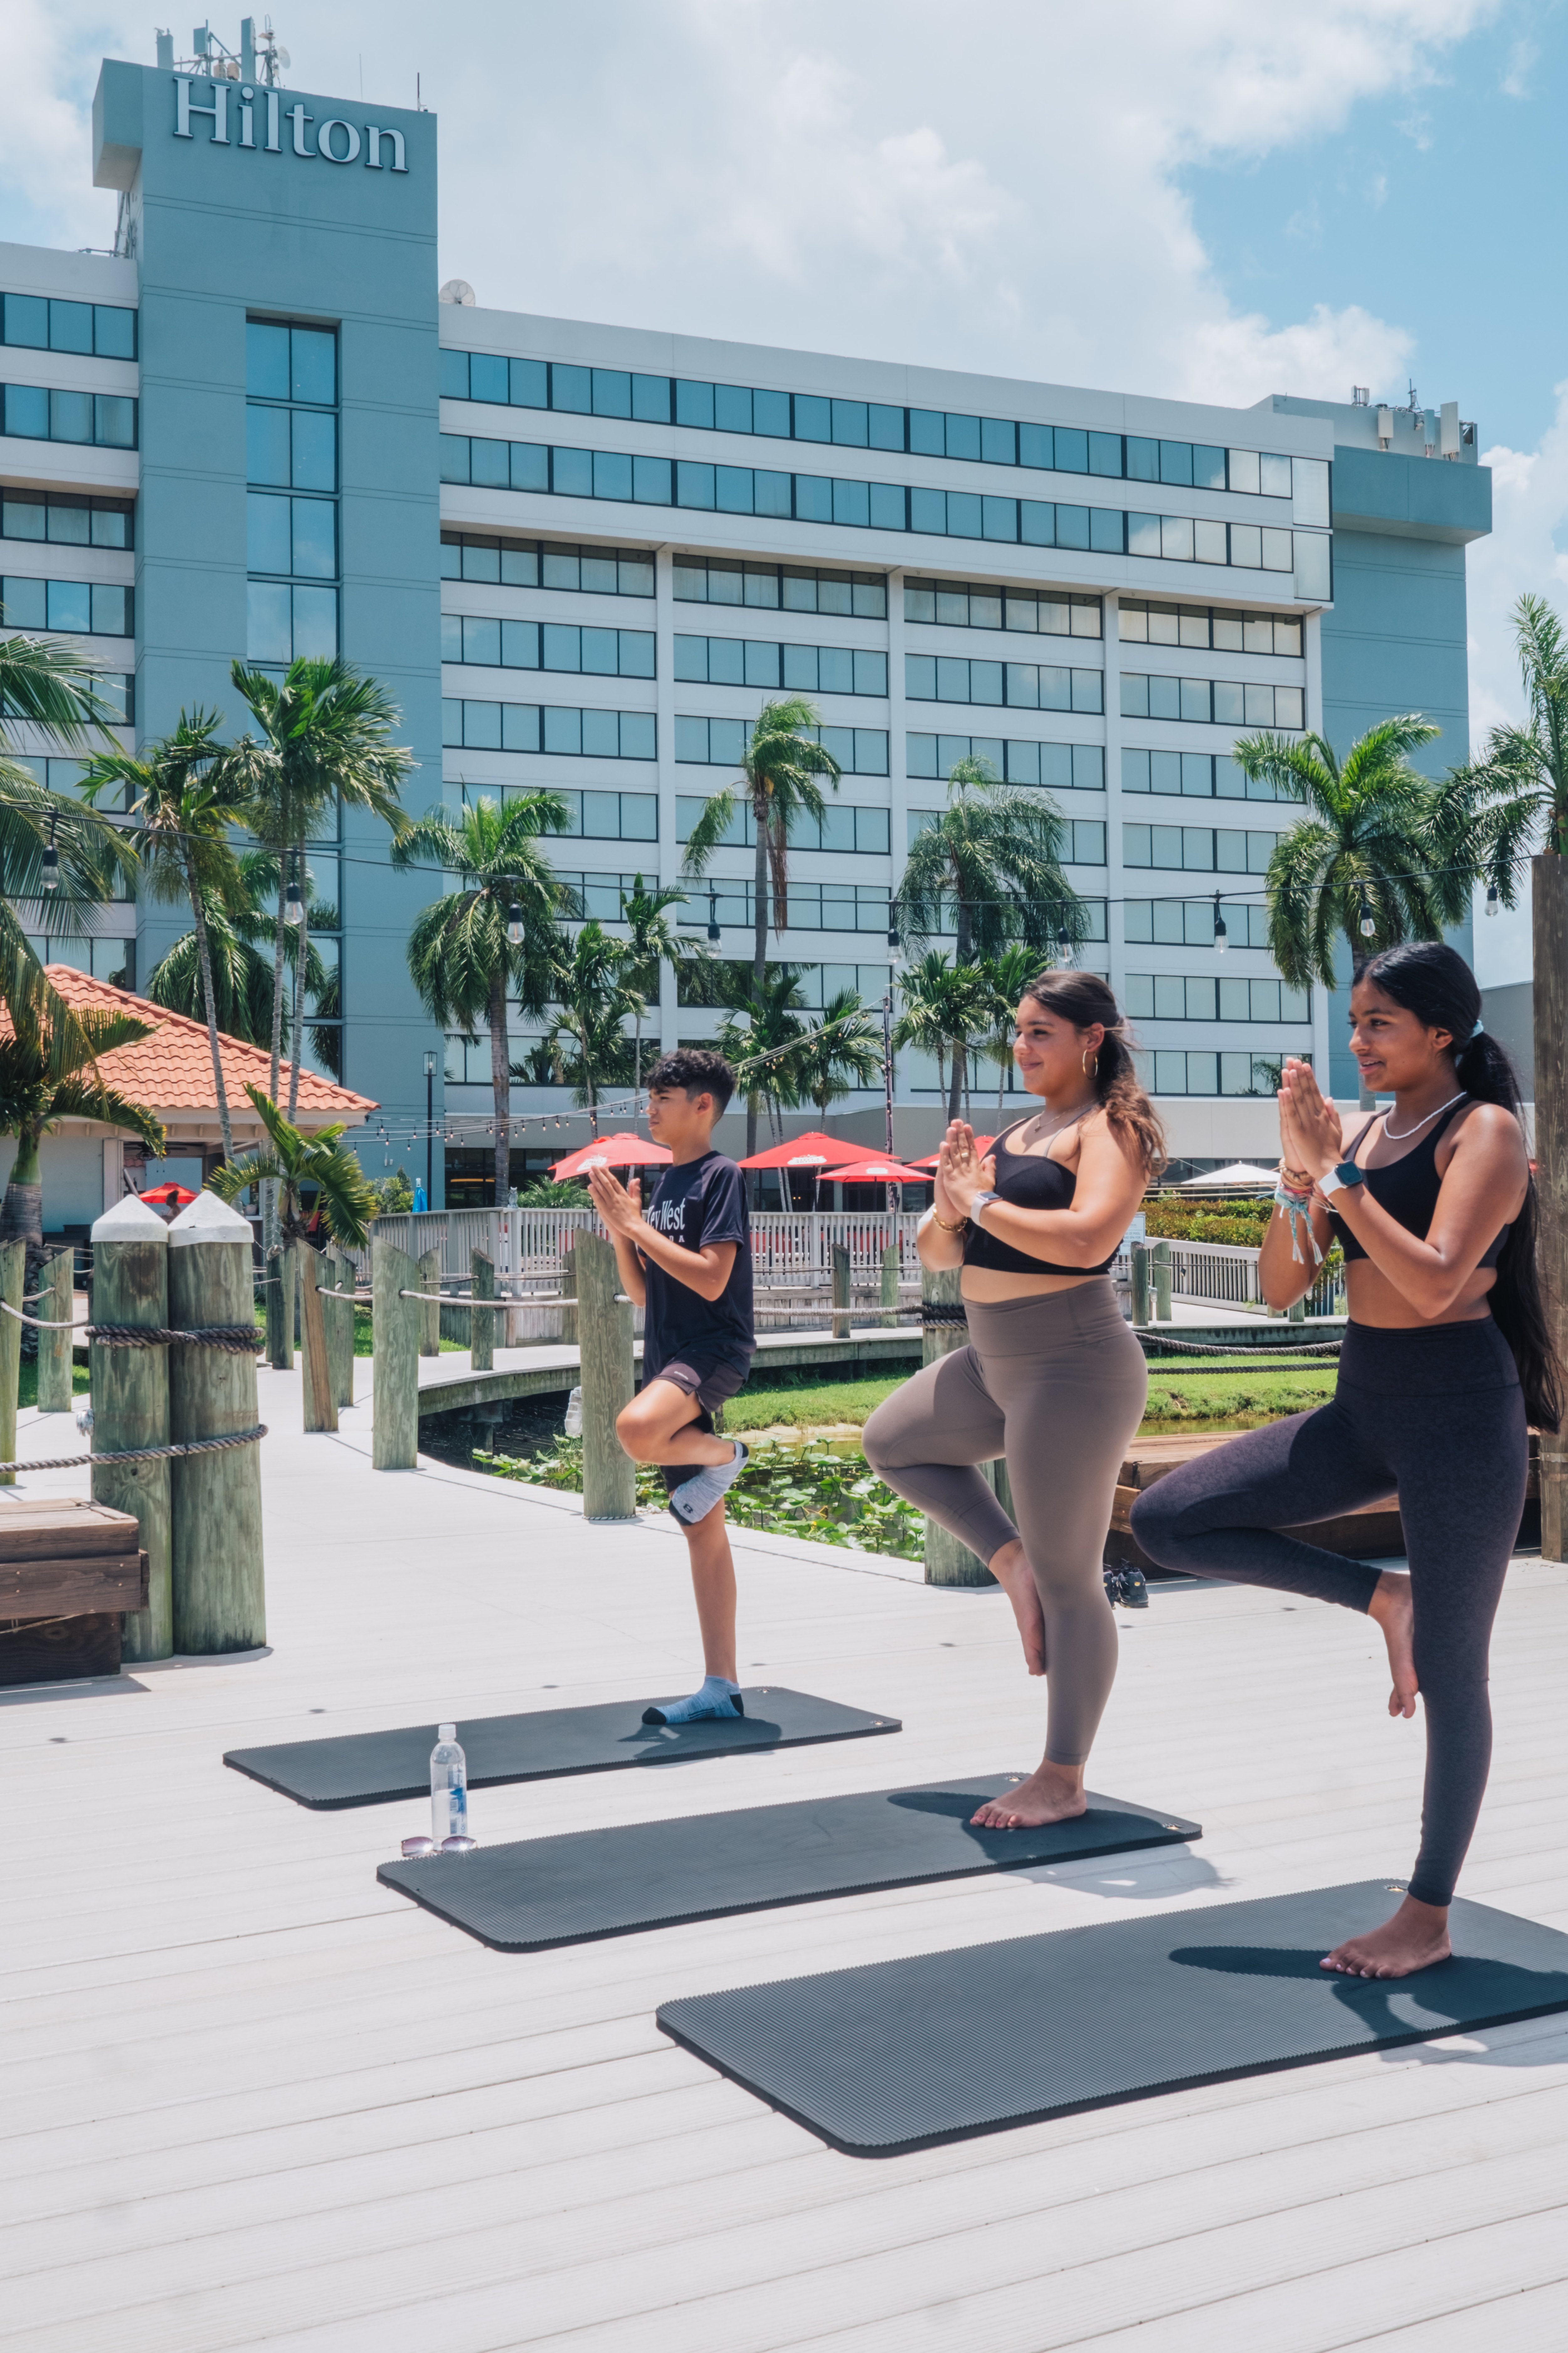 Hotel exterior with people doing yoga